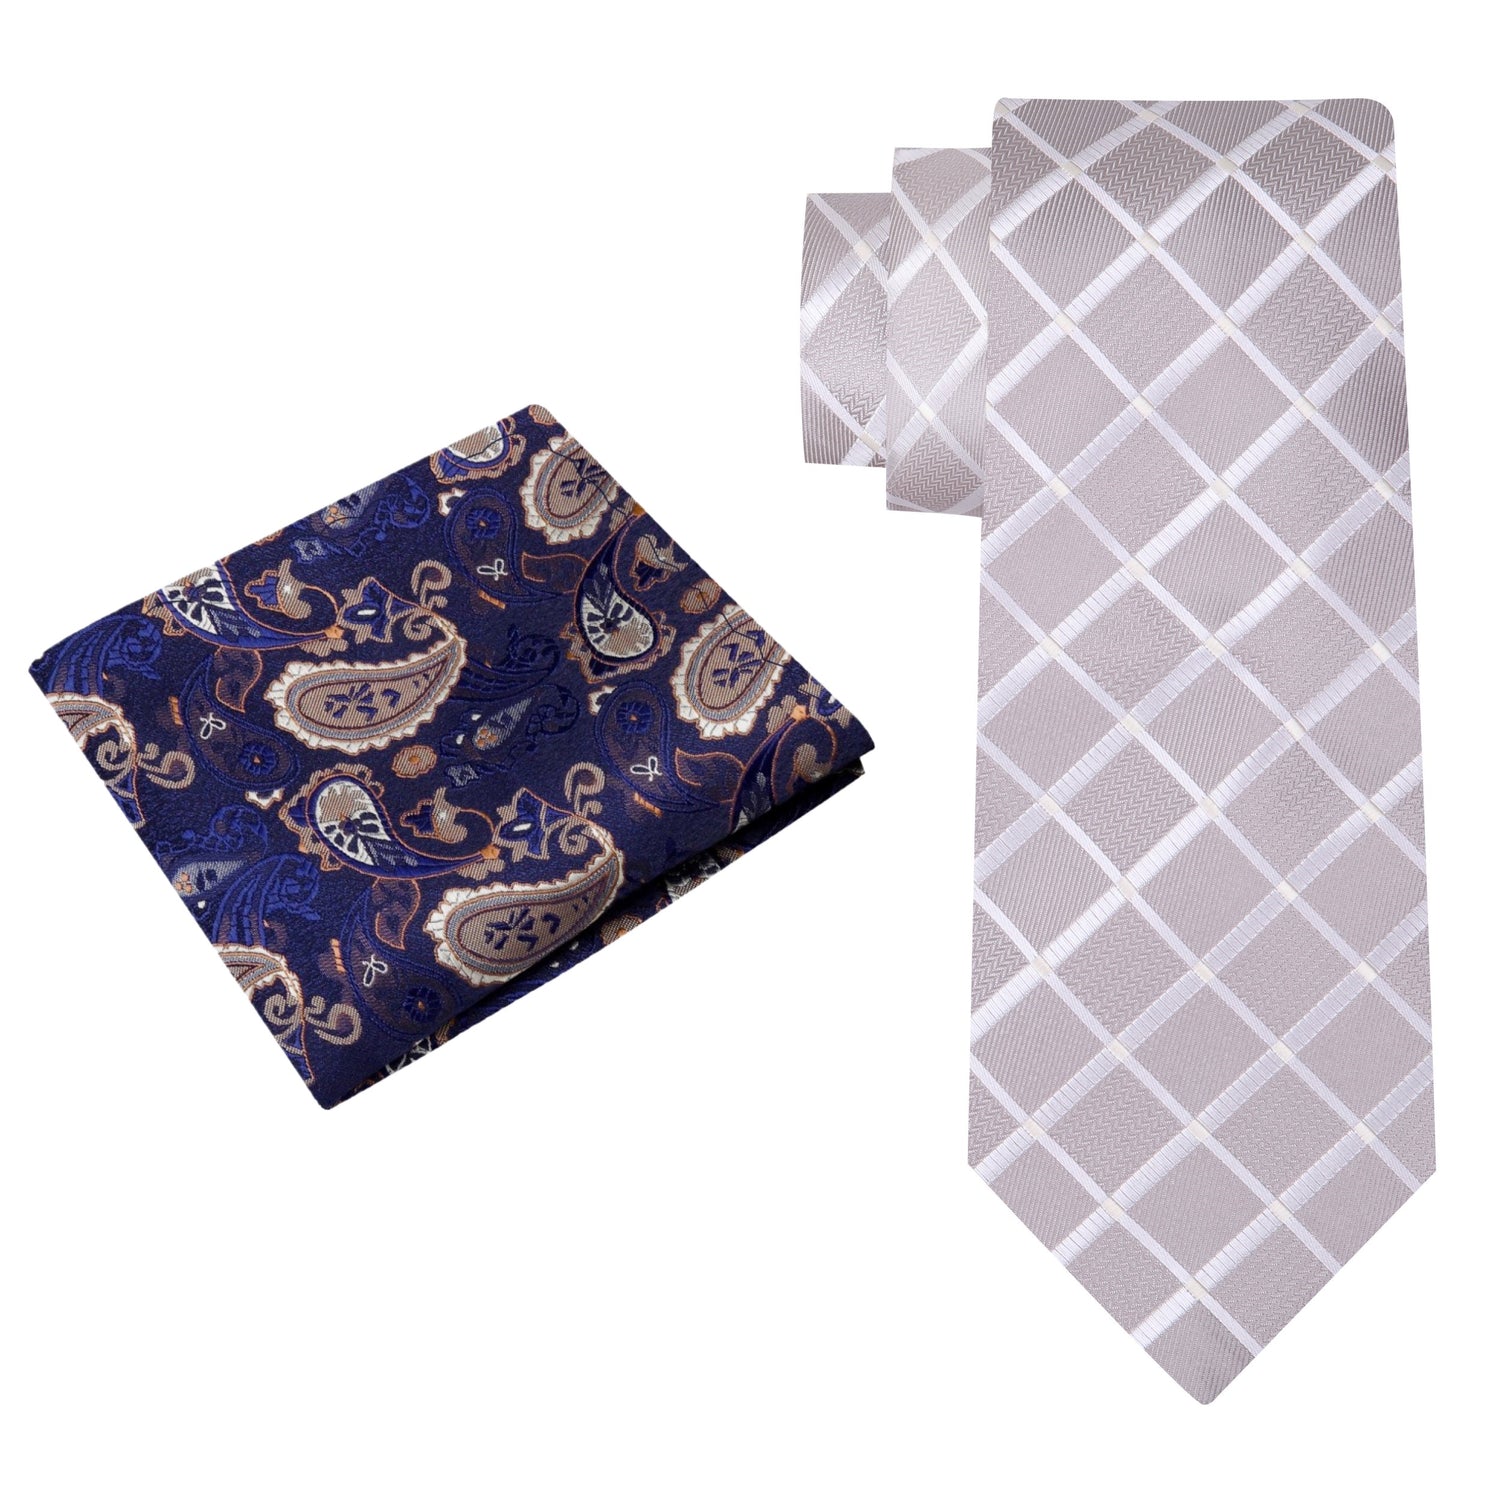 Alt View: Pearl Geometric Tie and Accenting Blue and Brown Paisley Pocket Square